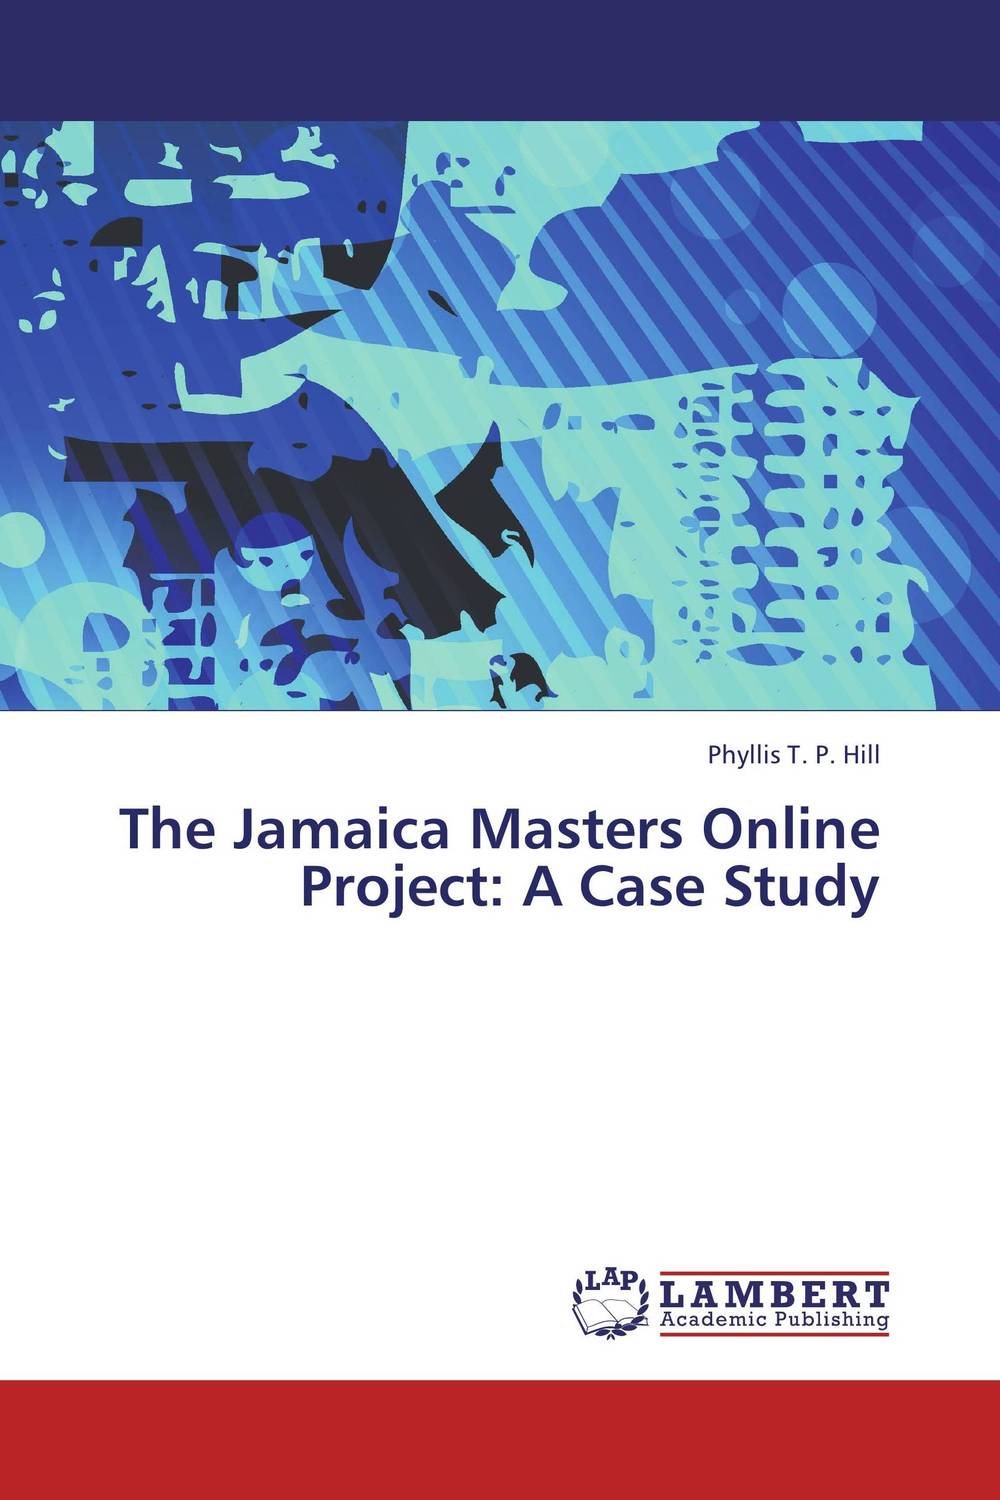 The Jamaica Masters Online Project: A Case Study